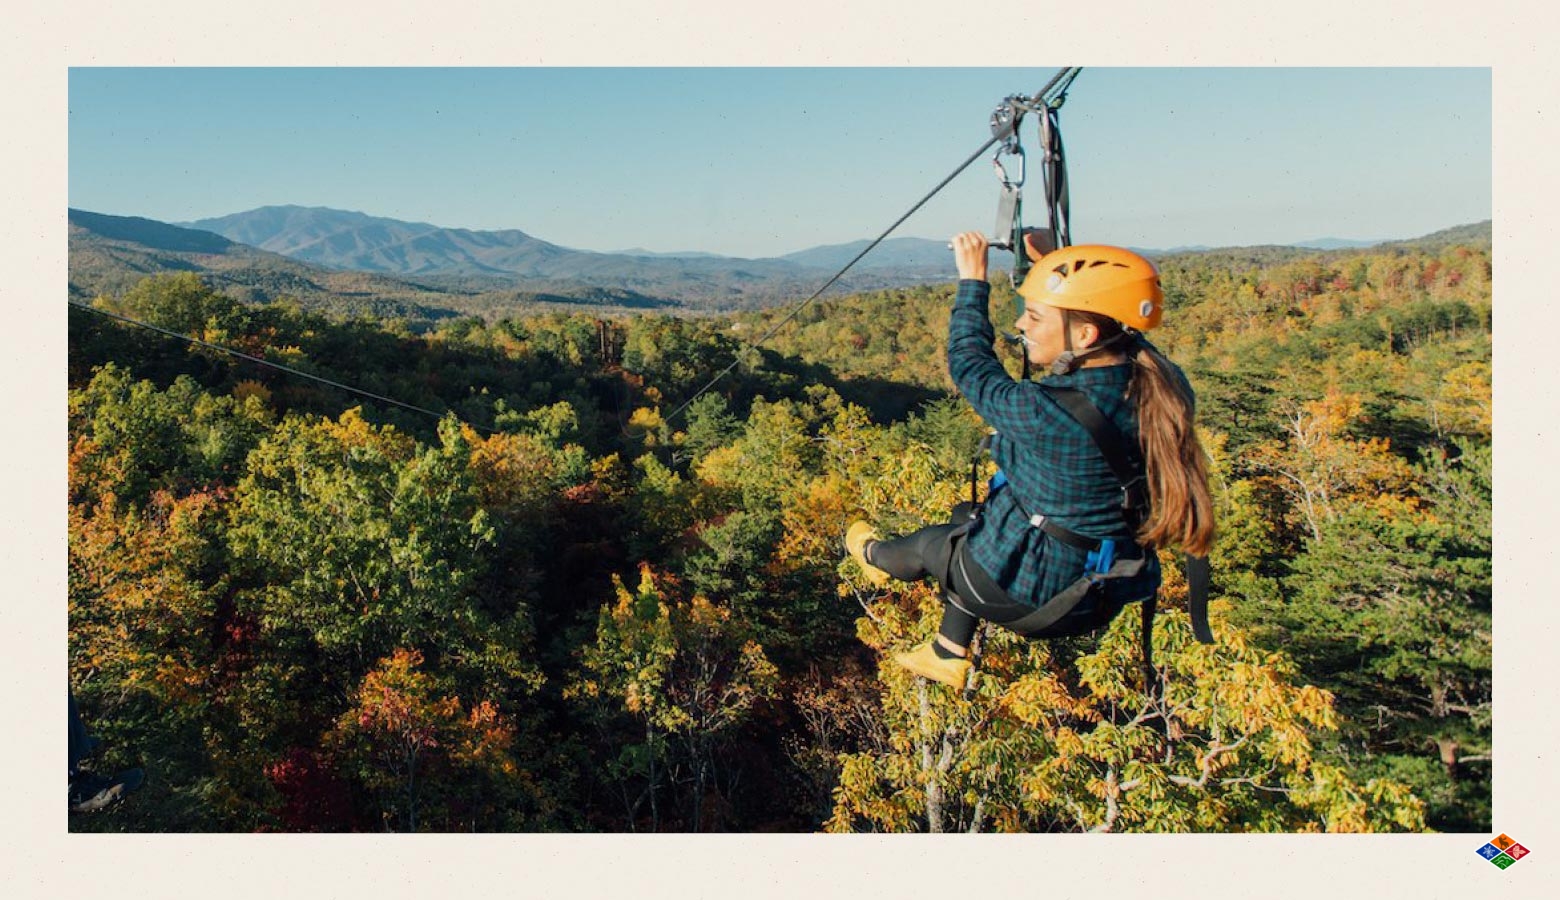 Ziplining in Gatlinburg is the perfect bachelorette party activity.